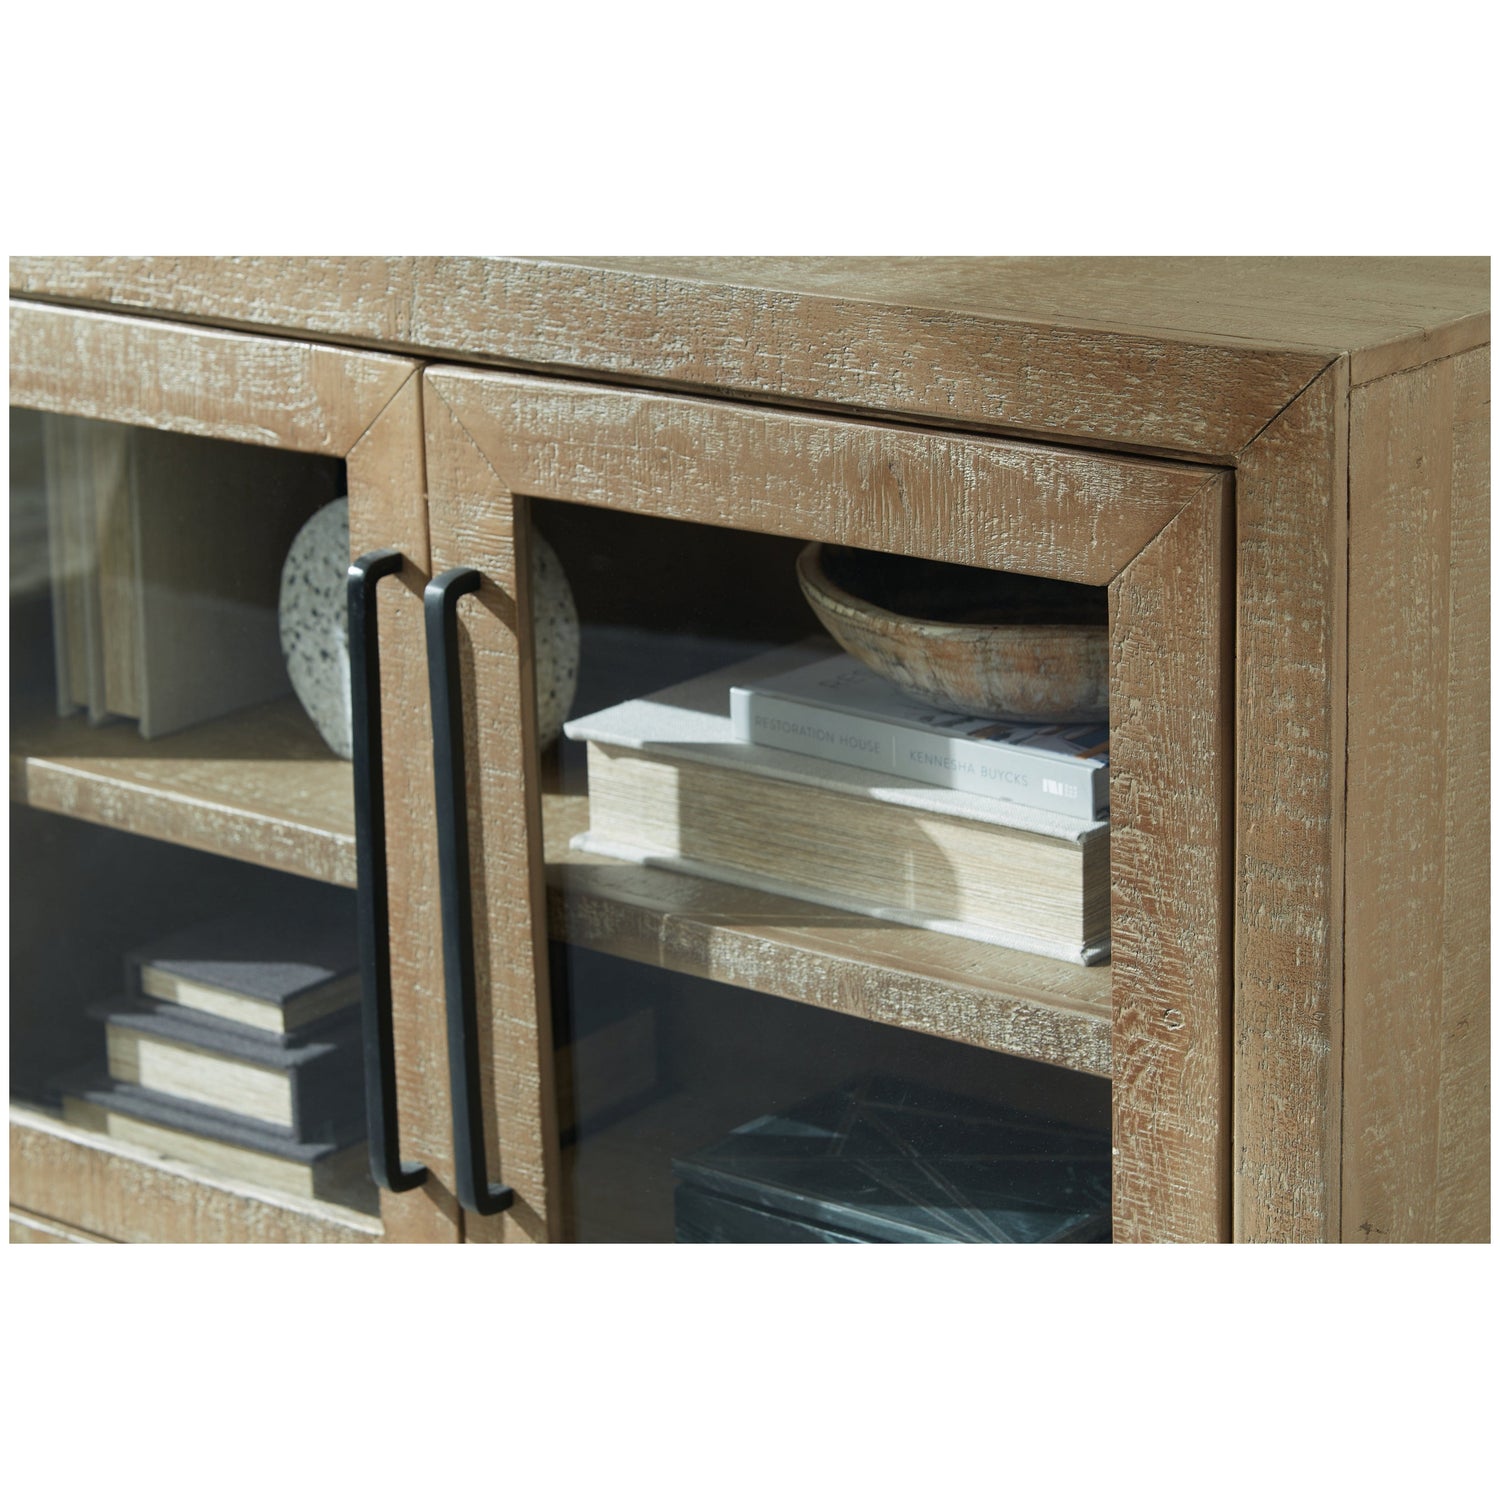 Waltleigh Accent Cabinet Ash-A4000473